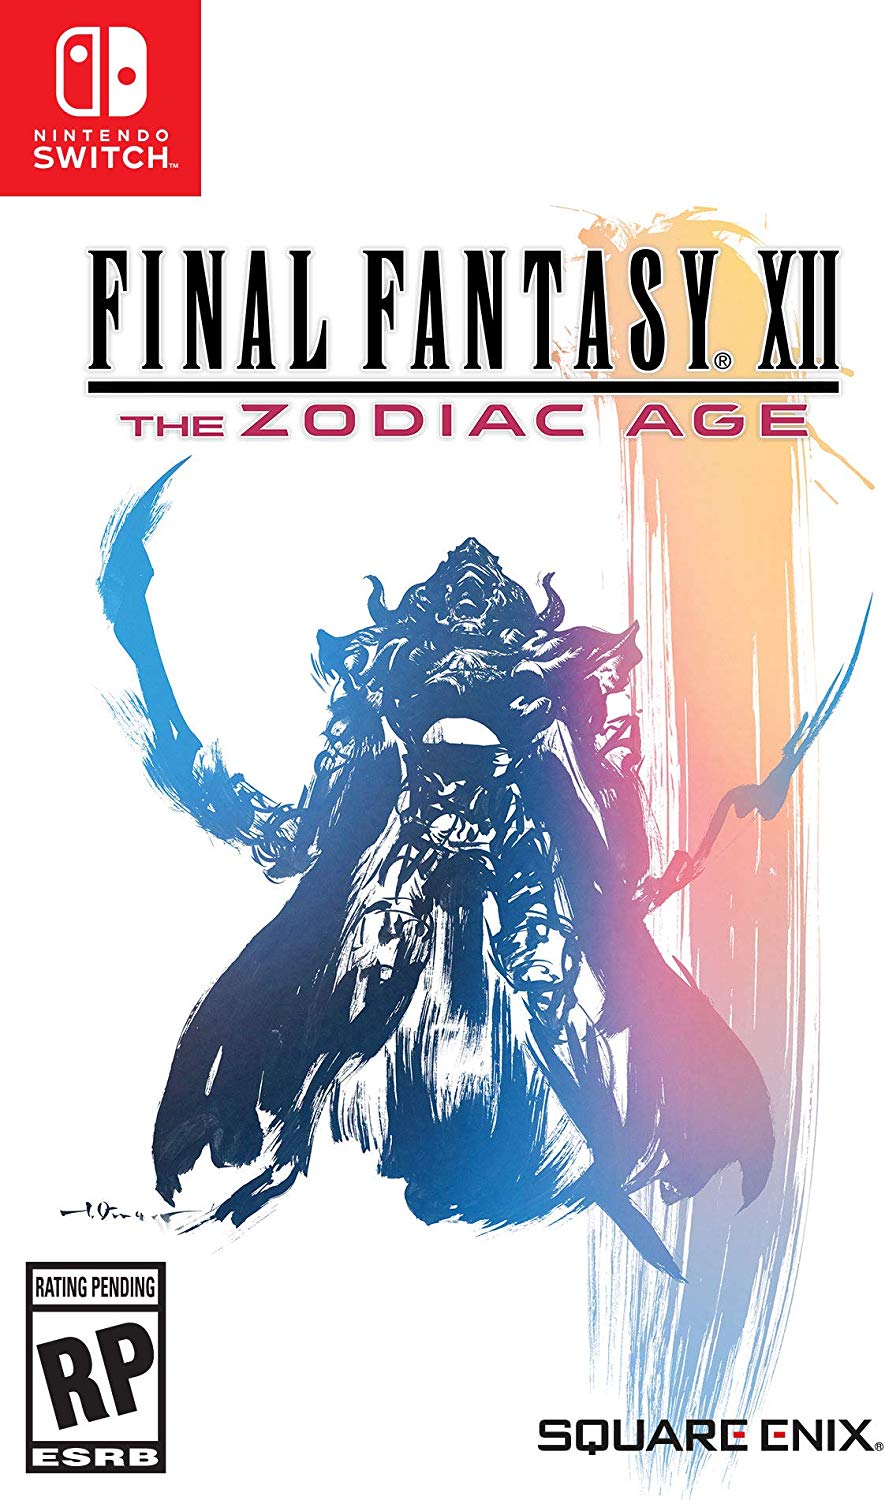 Gonintendotweet Sur Twitter Final Fantasy Xii The Zodiac Age Cover Art And Pricing Revealed T Co Kgeifehkhy T Co Zjnhb9rypq Twitter